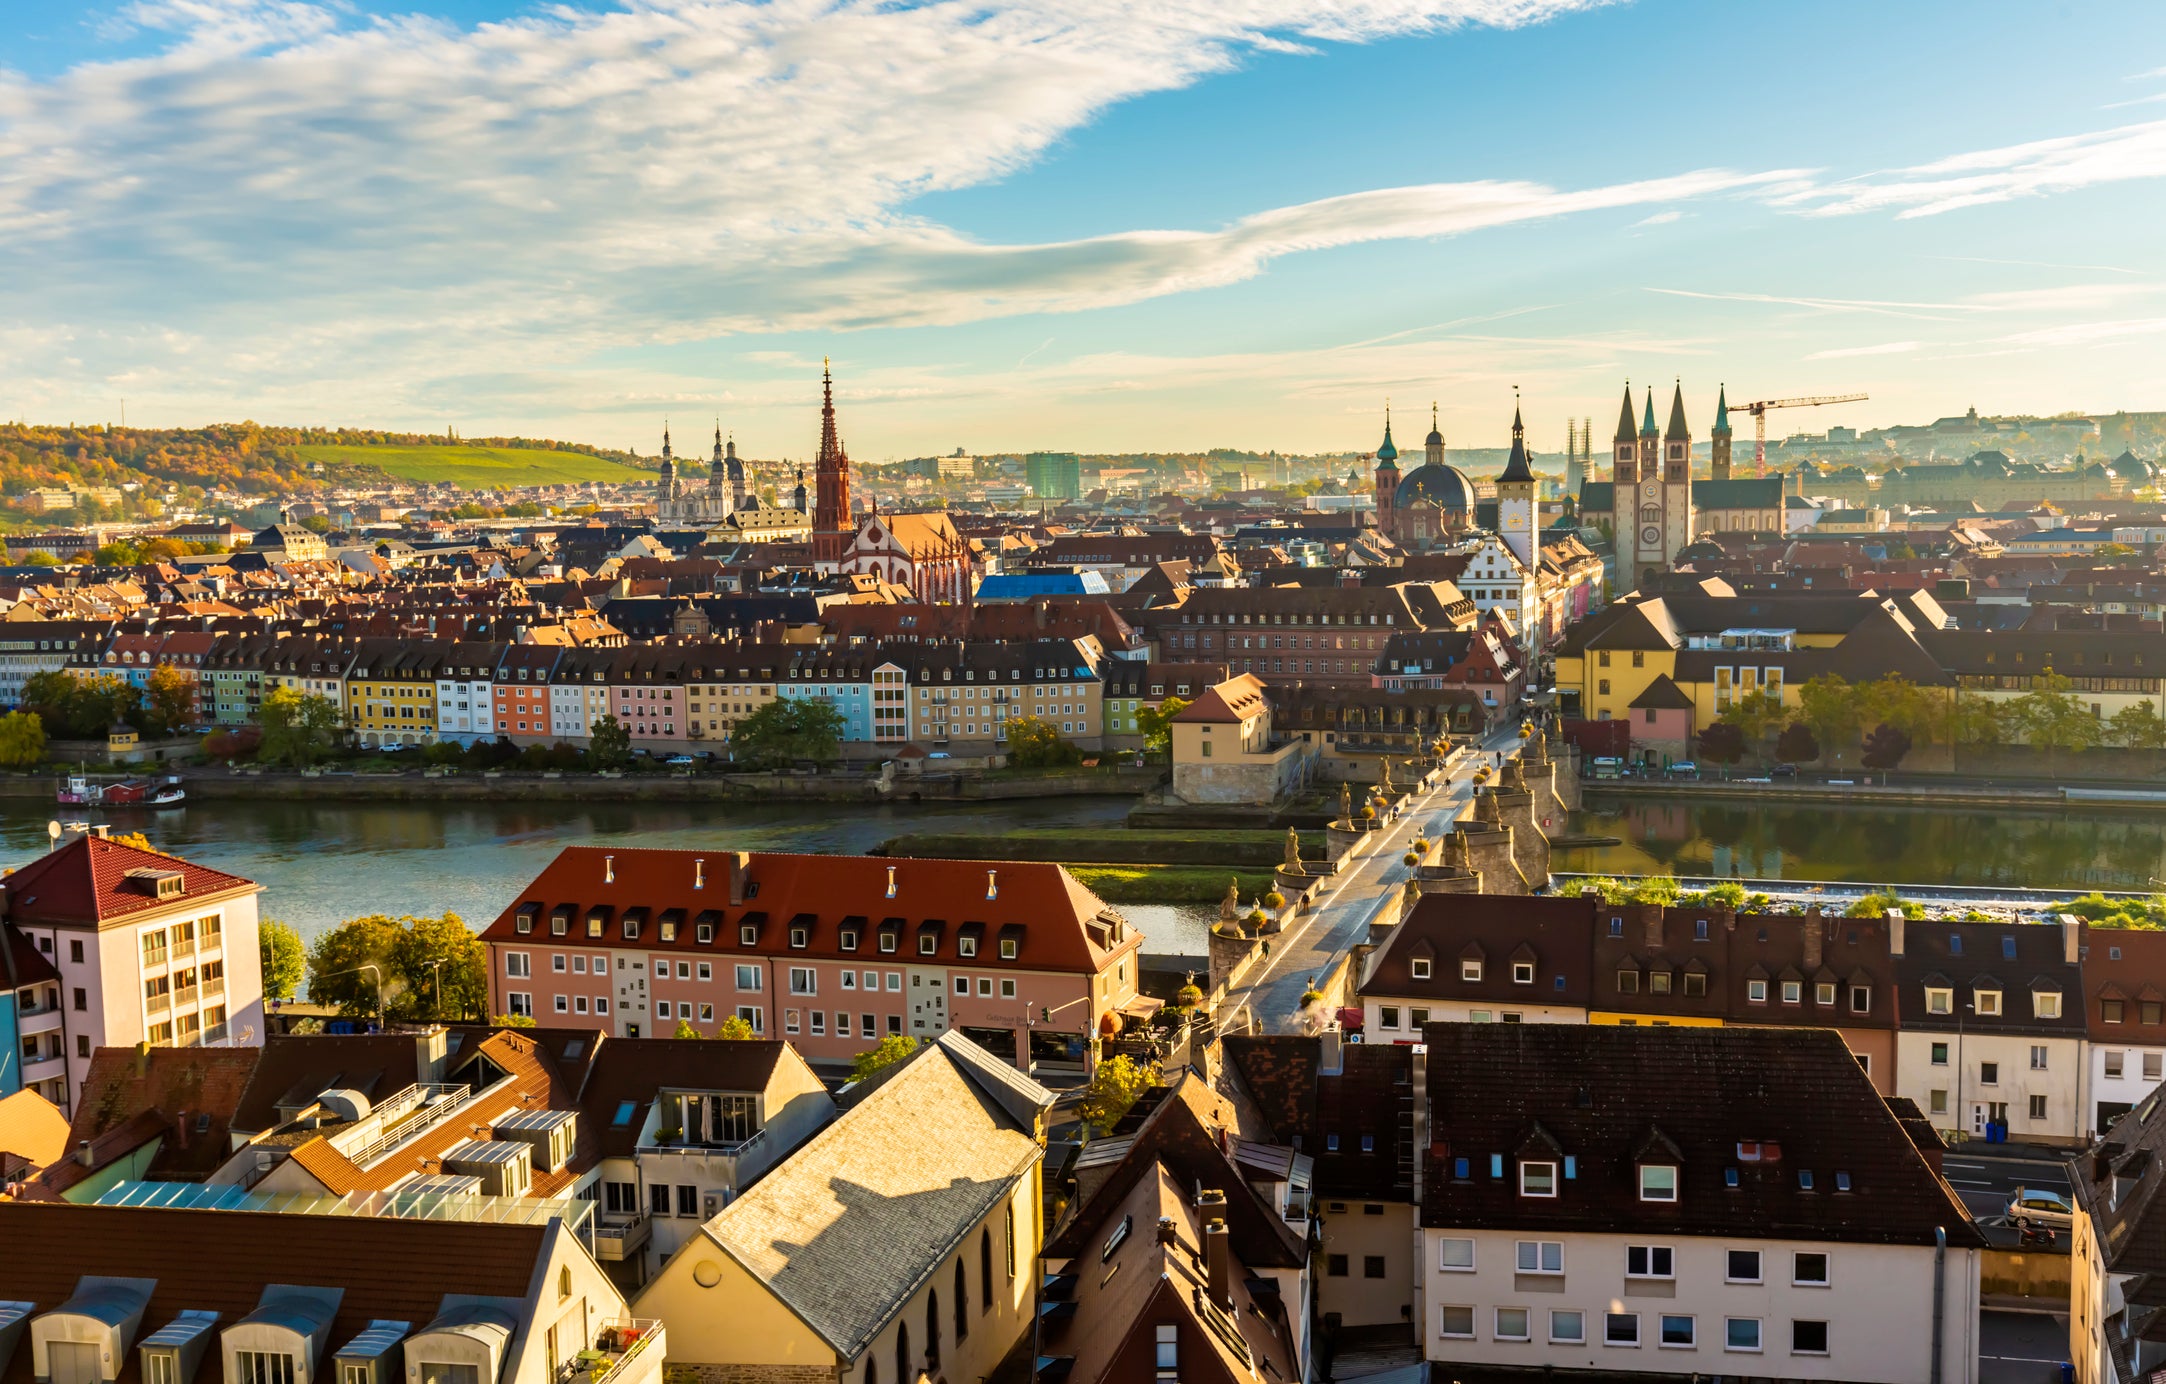 Head to Würzburg to experience Franconian culture